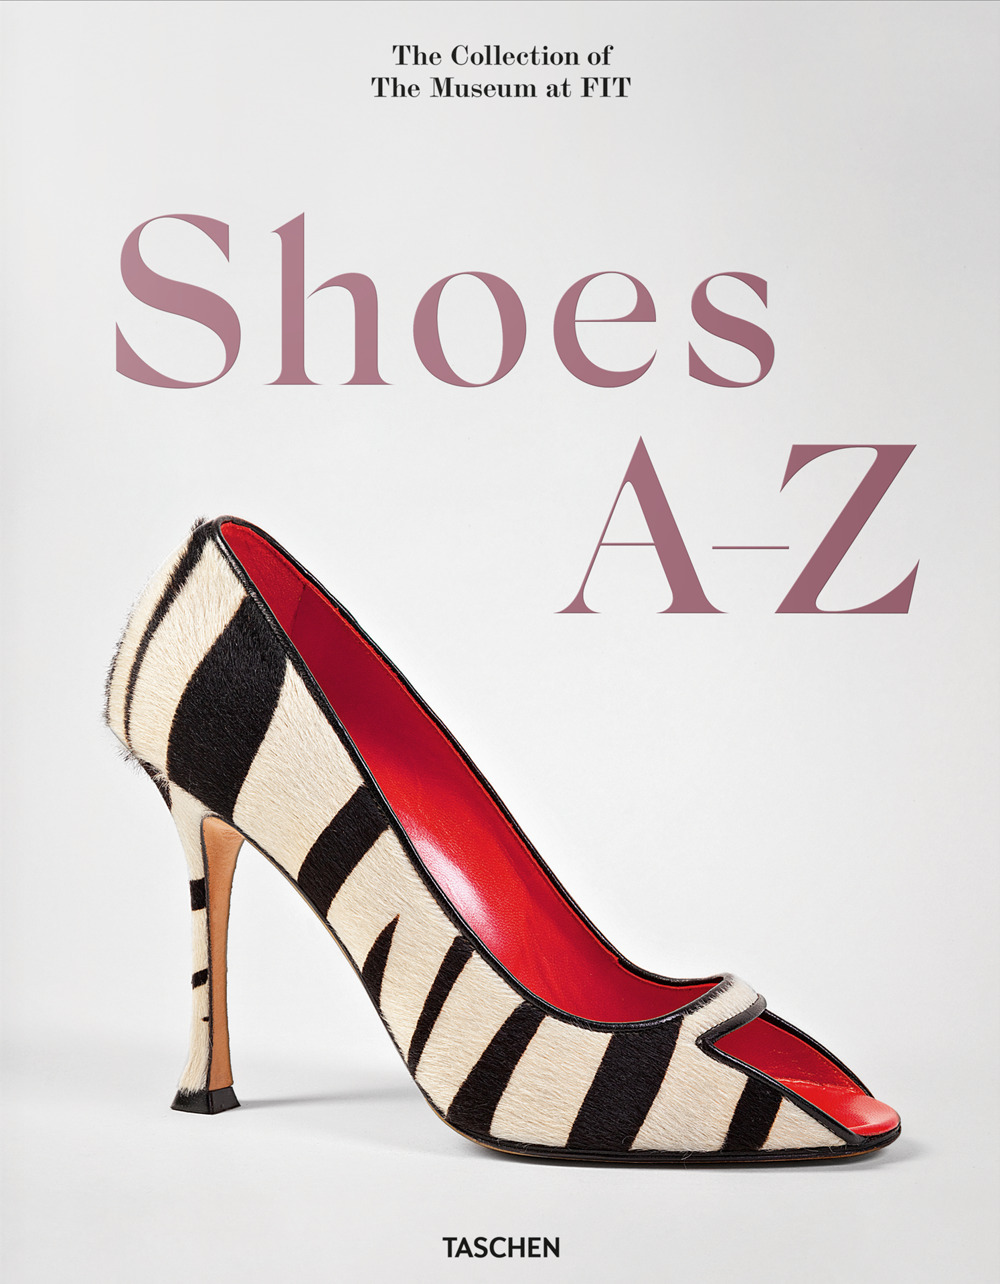 Shoes A-Z. The Collection of The Museum at FIT. Ediz. inglese, francese e tedesca